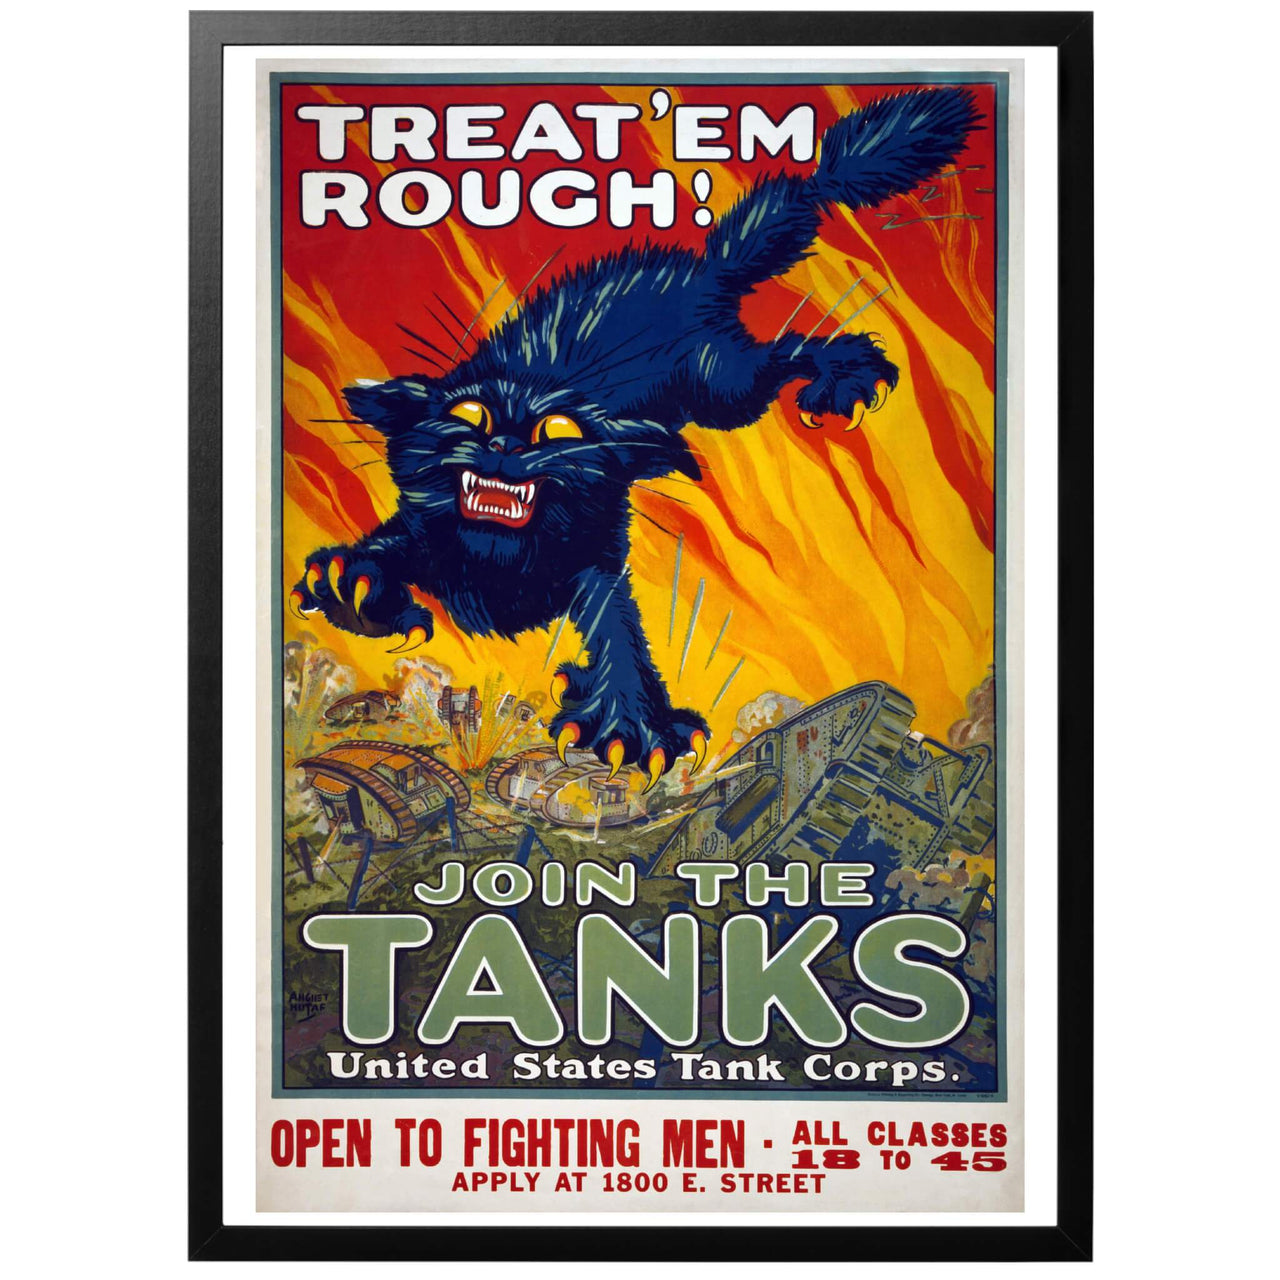 Treat 'Em Rough! Join the Tanks Poster